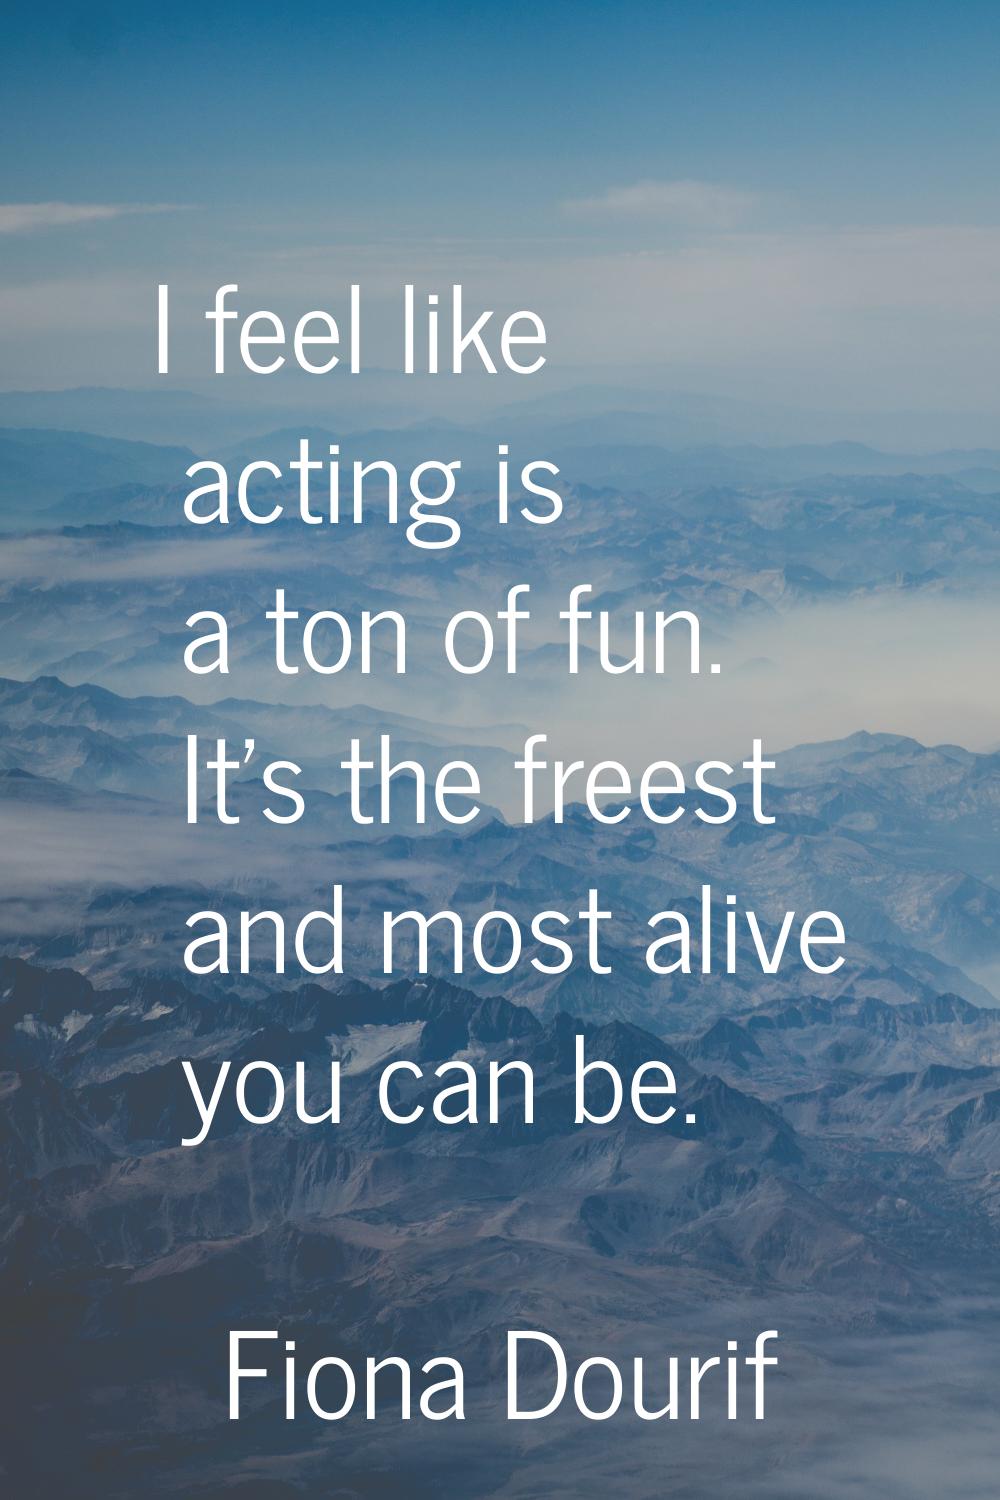 I feel like acting is a ton of fun. It's the freest and most alive you can be.